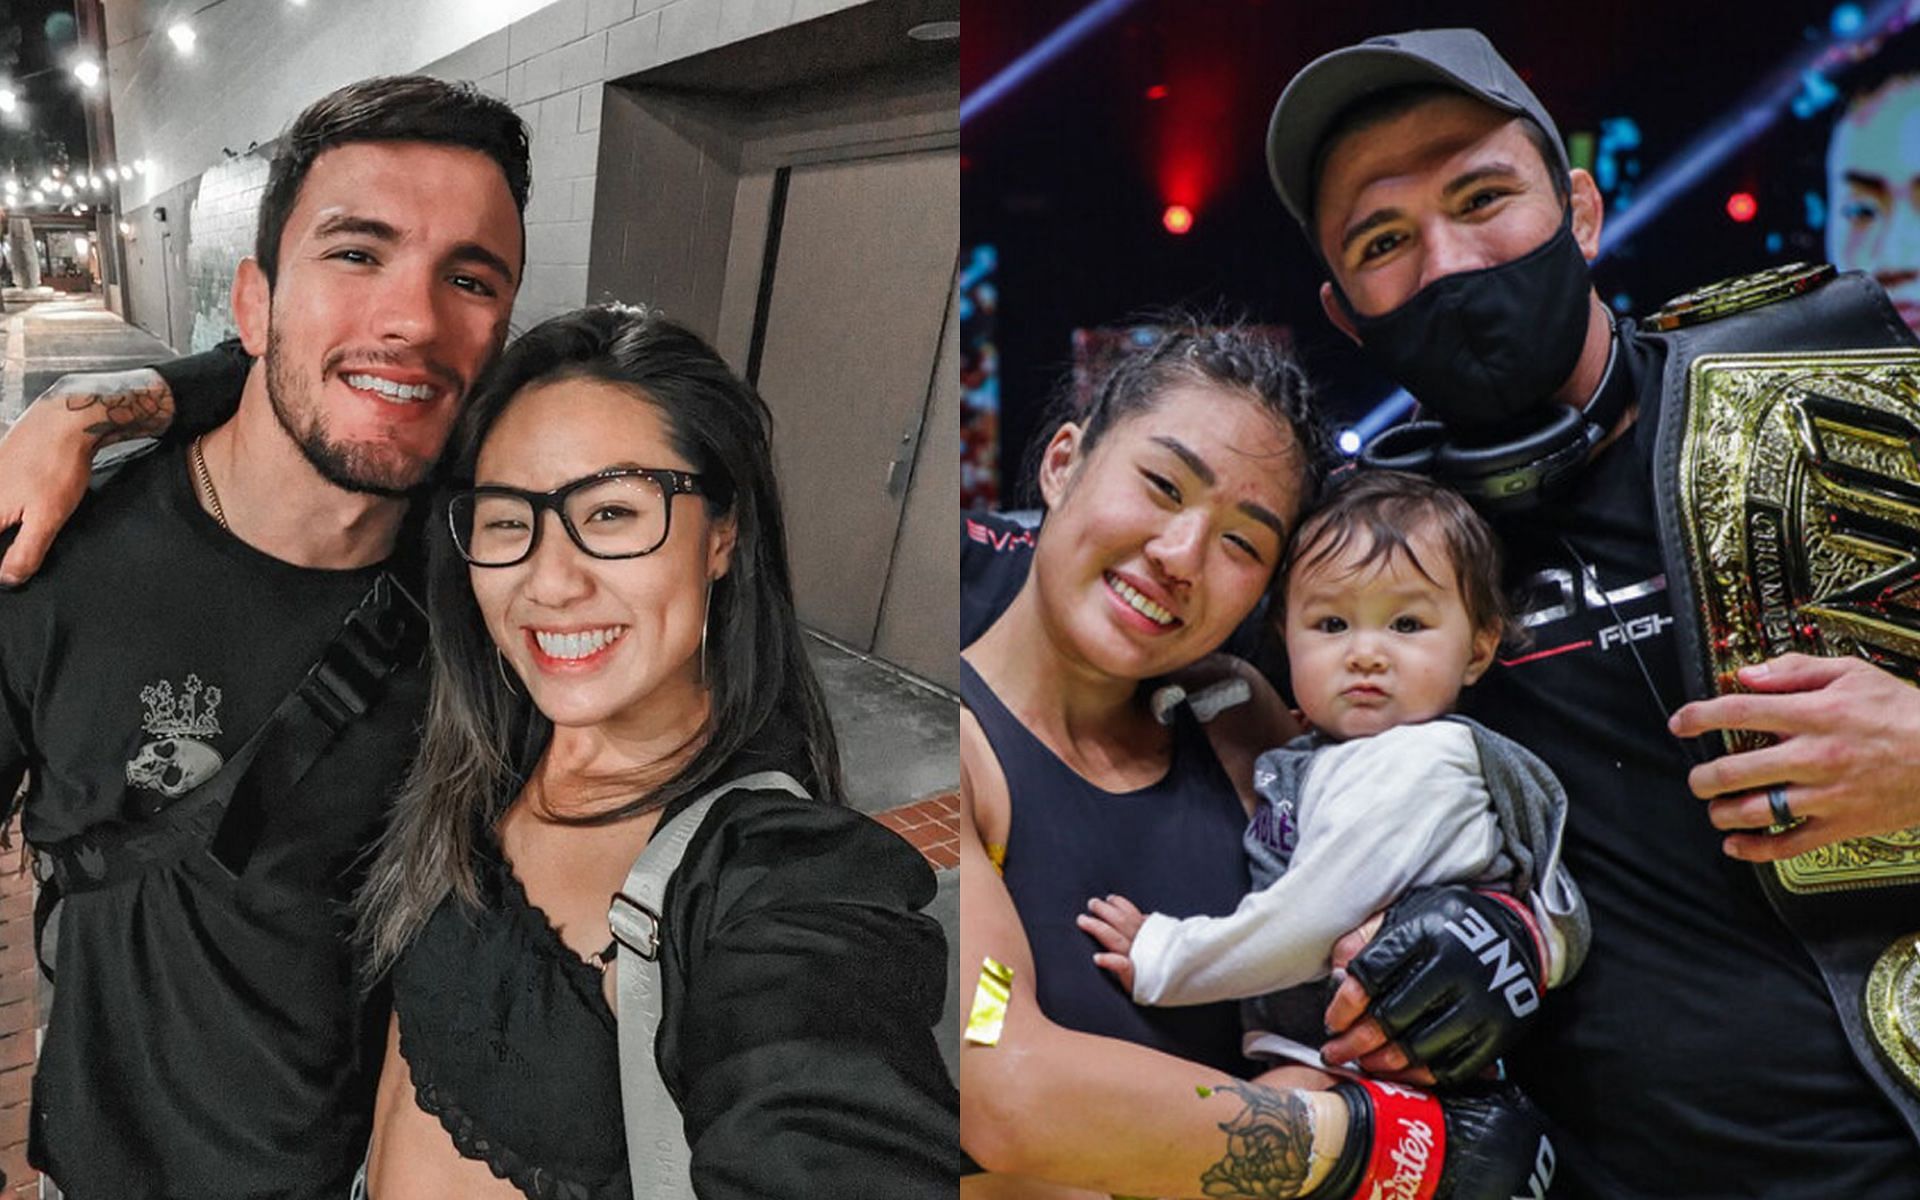 Date nights don&#039;t come by often for Angela Lee and Bruno Pucci, but their baby Ava makes all the changes worth it. | [Photos: @angelaleemma on Instagram/ONE Championship]